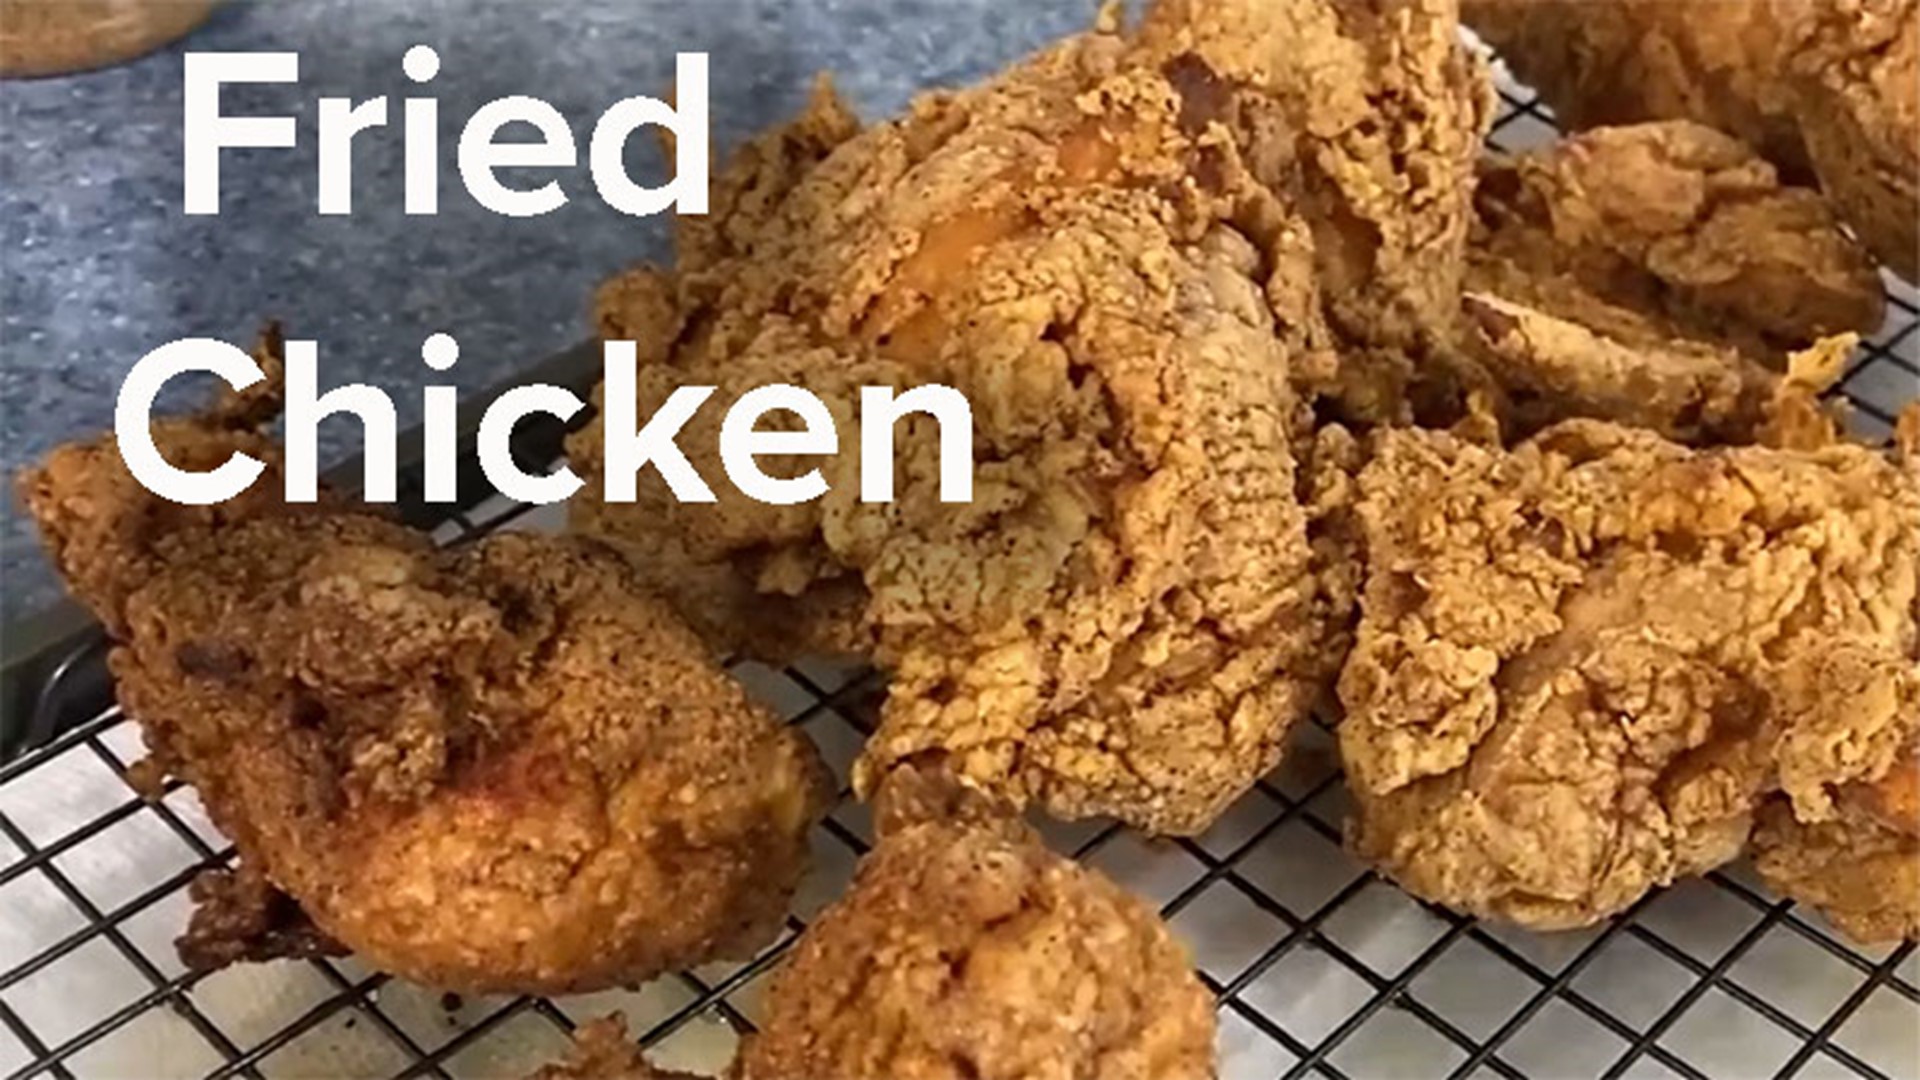 From simple to more specialized recipes, Chef Kevin has you covered when it comes to preparing fried chicken.